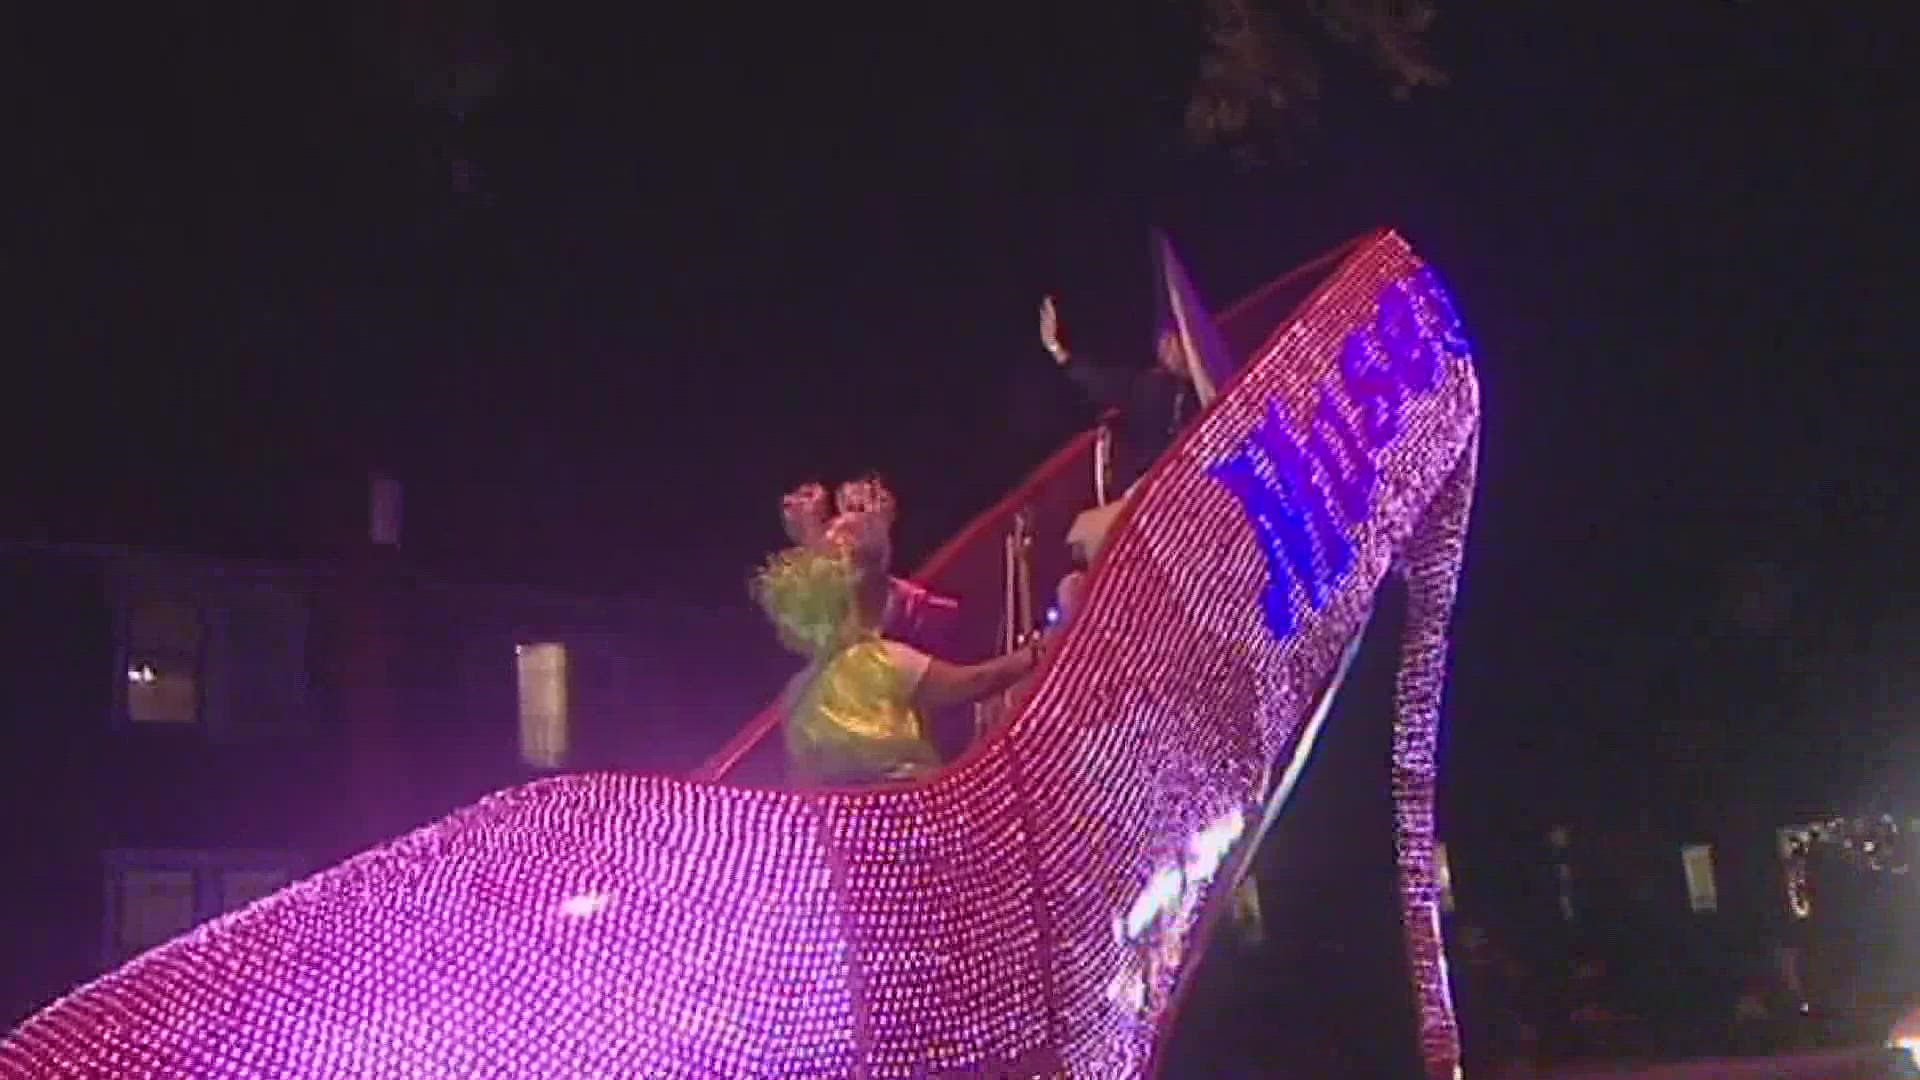 Parades were originally shortened again this year because of ongoing manpower issues at the NOPD.